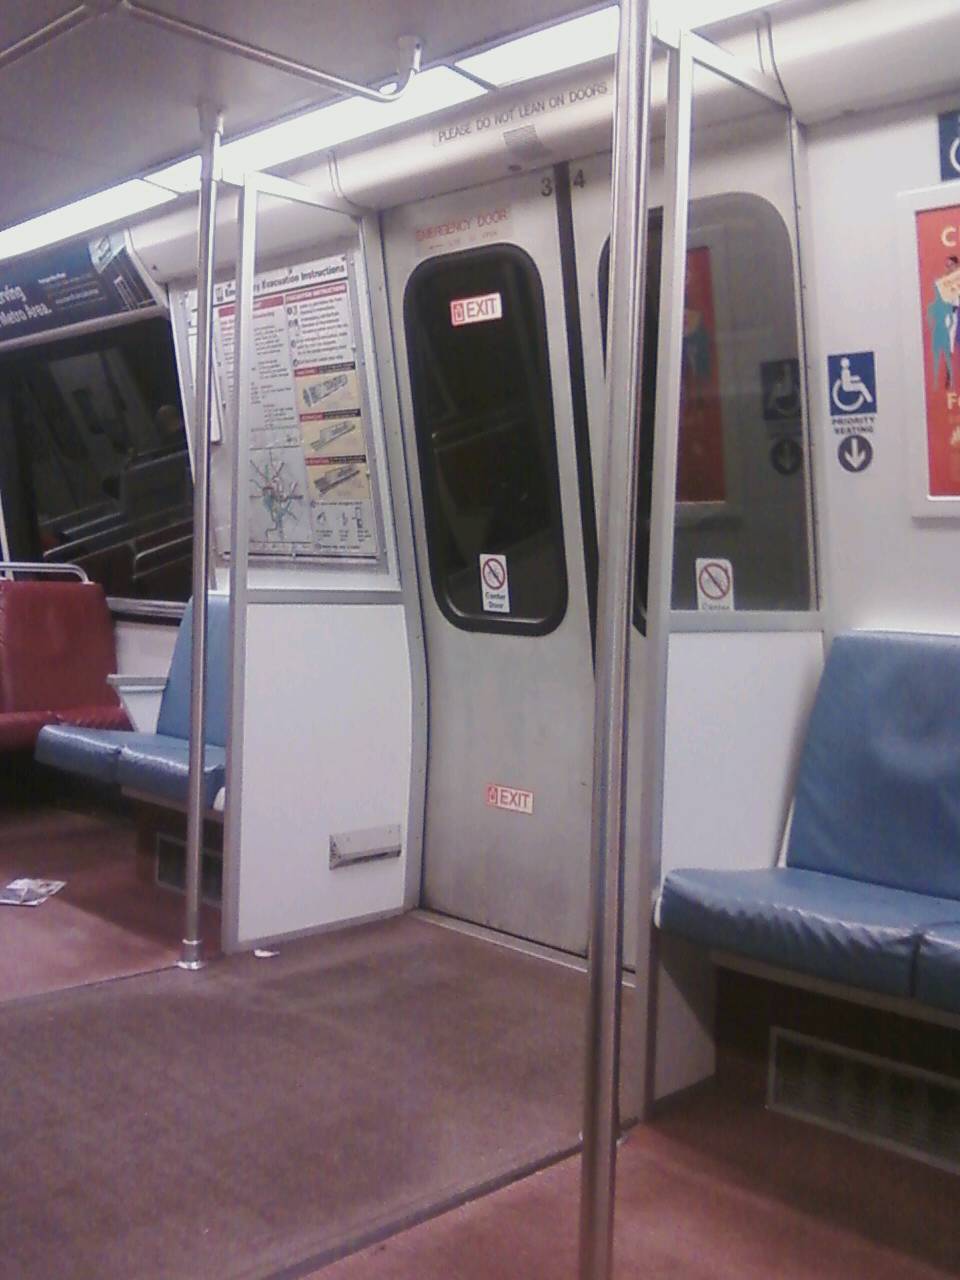 Door
partition in a WMATA/DC Metro 2000 series car. Note this partition
includes the wind screen. These partitions are full length from the floor
almost to the ceiling, which serve as adequate protection against the
elements when platforming outdoors for passengers seated near the doors. 
The dividers also serve to separate people entering/exiting the train 
from those seated so they don't brush up against seated passengers. DC
Metro's 7000-series cars offer no such protection, and passengers seated 
near the doors will likely be rained on and/or experience temperature 
swings as the train platforms outdoors. title=